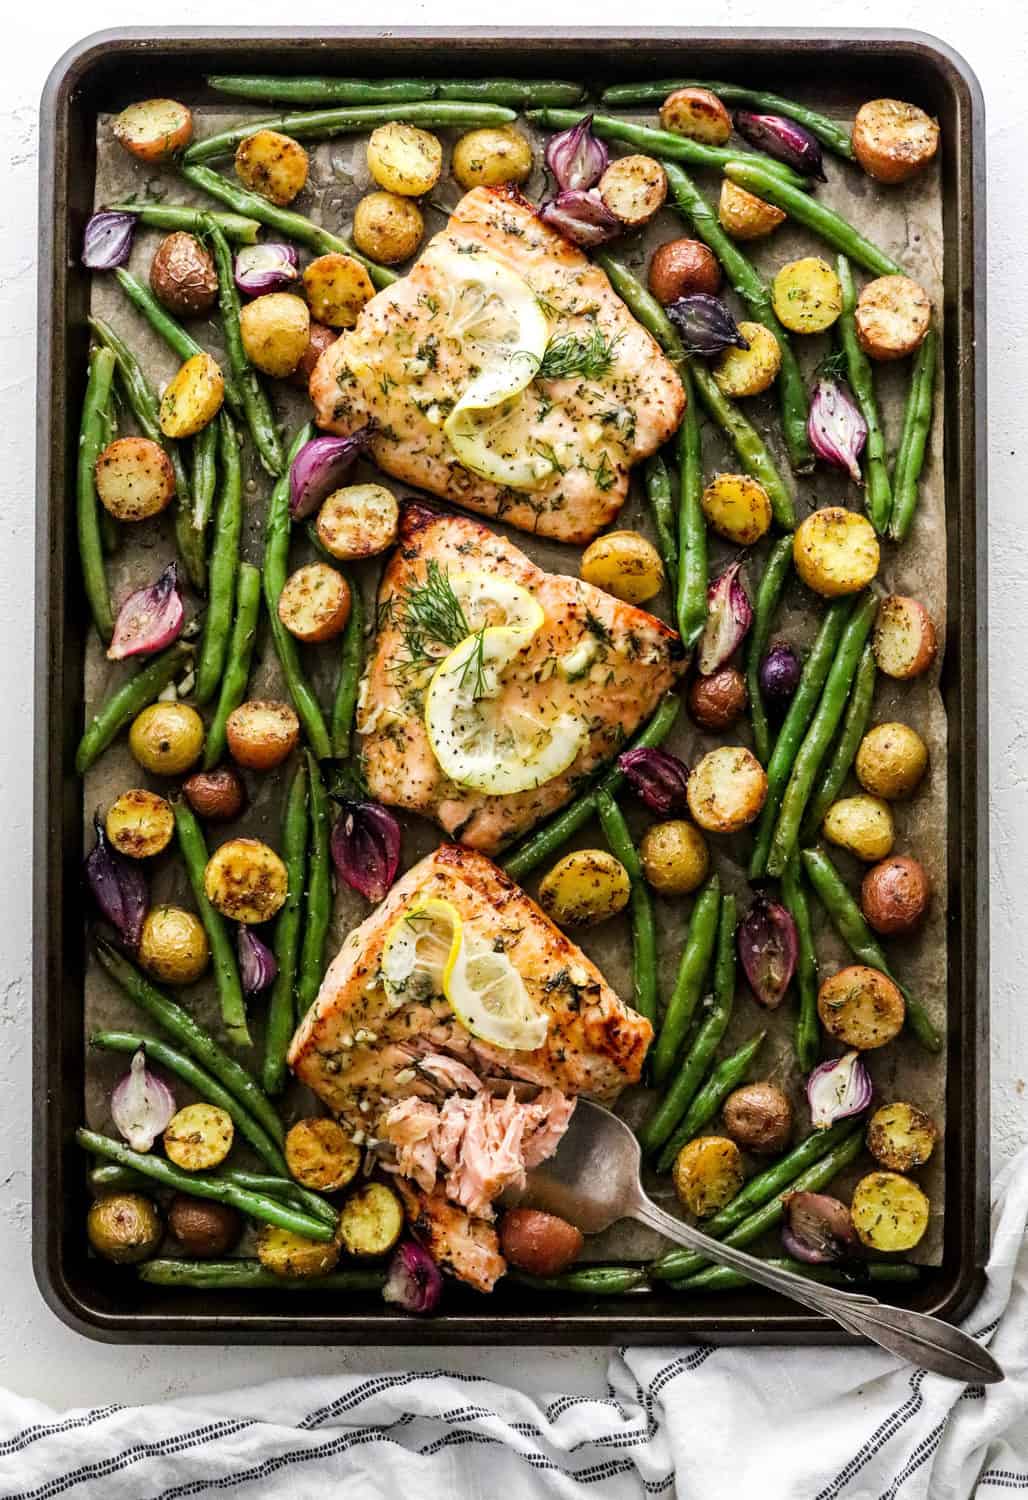 Cooked salmon filets, surrounded by cooked green beans, purple baby onion and baby potatoes spread around the salmon on a sheet pan